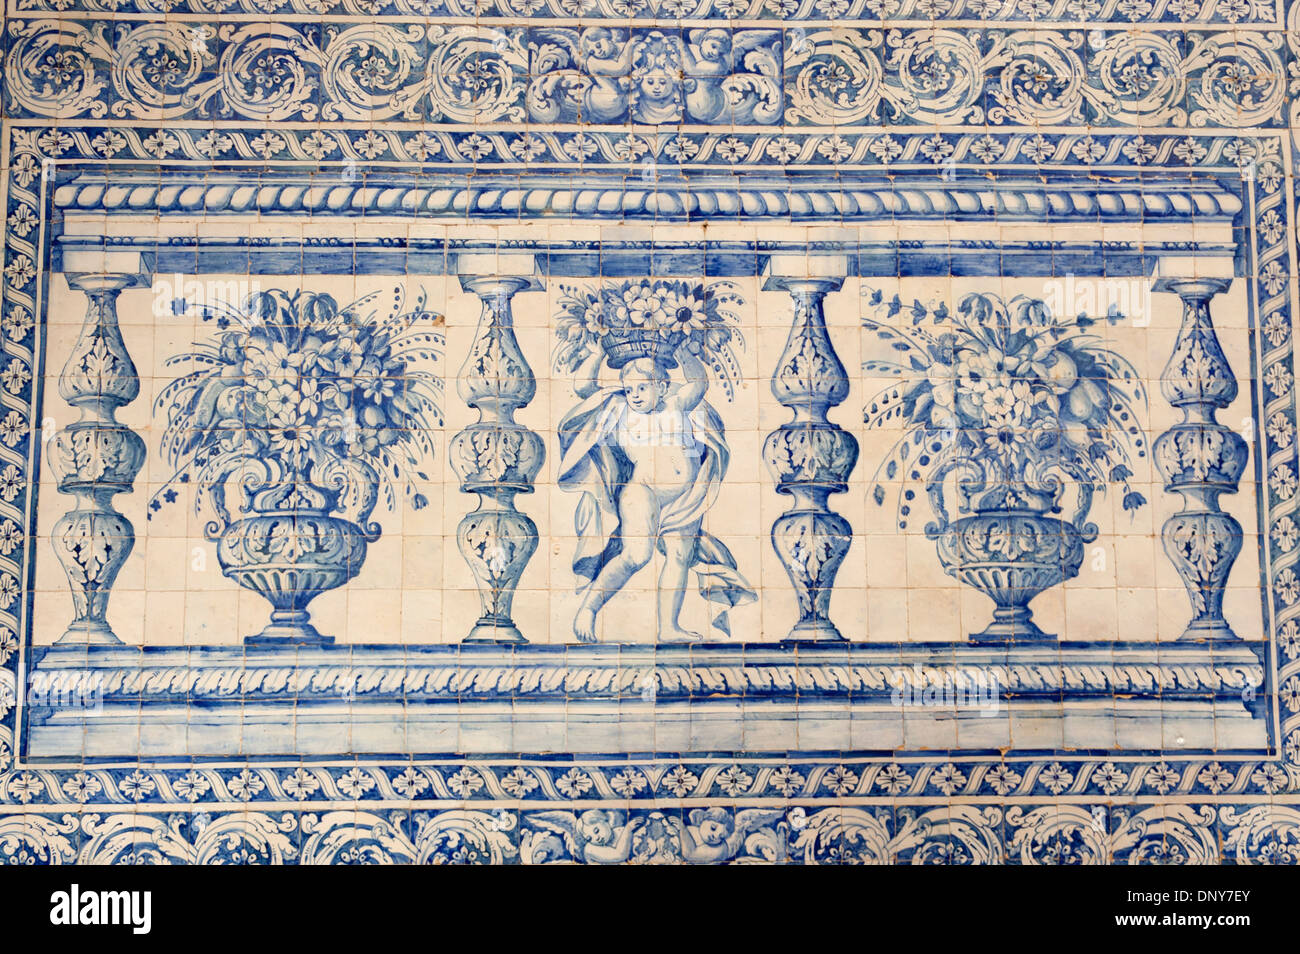 Portuguese blue and white azulejos painted tiles cherub with vases and flowers with ornate floral border Évora Alentejo Portugal Stock Photo